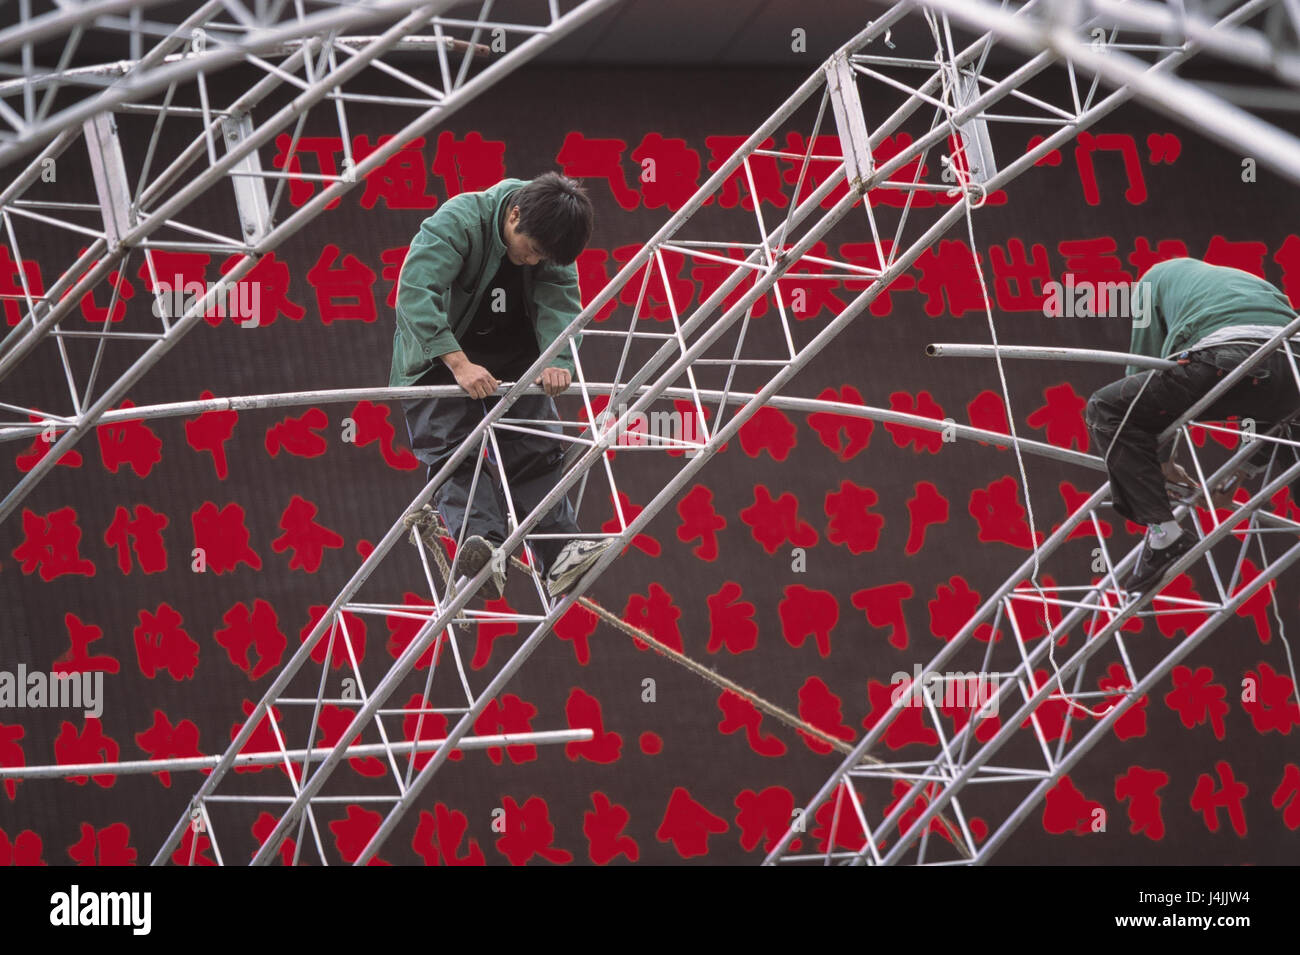 China, Shanghai, Nanjing Donglu, tent construction, worker, videowall no model release, Asia, Eastern China, Shanghai, men, two, tent, fixed tent, build up, editing worker, have a good head for heights, balancing act, scaffolding, iron scaffolding, tent sticks Stock Photo